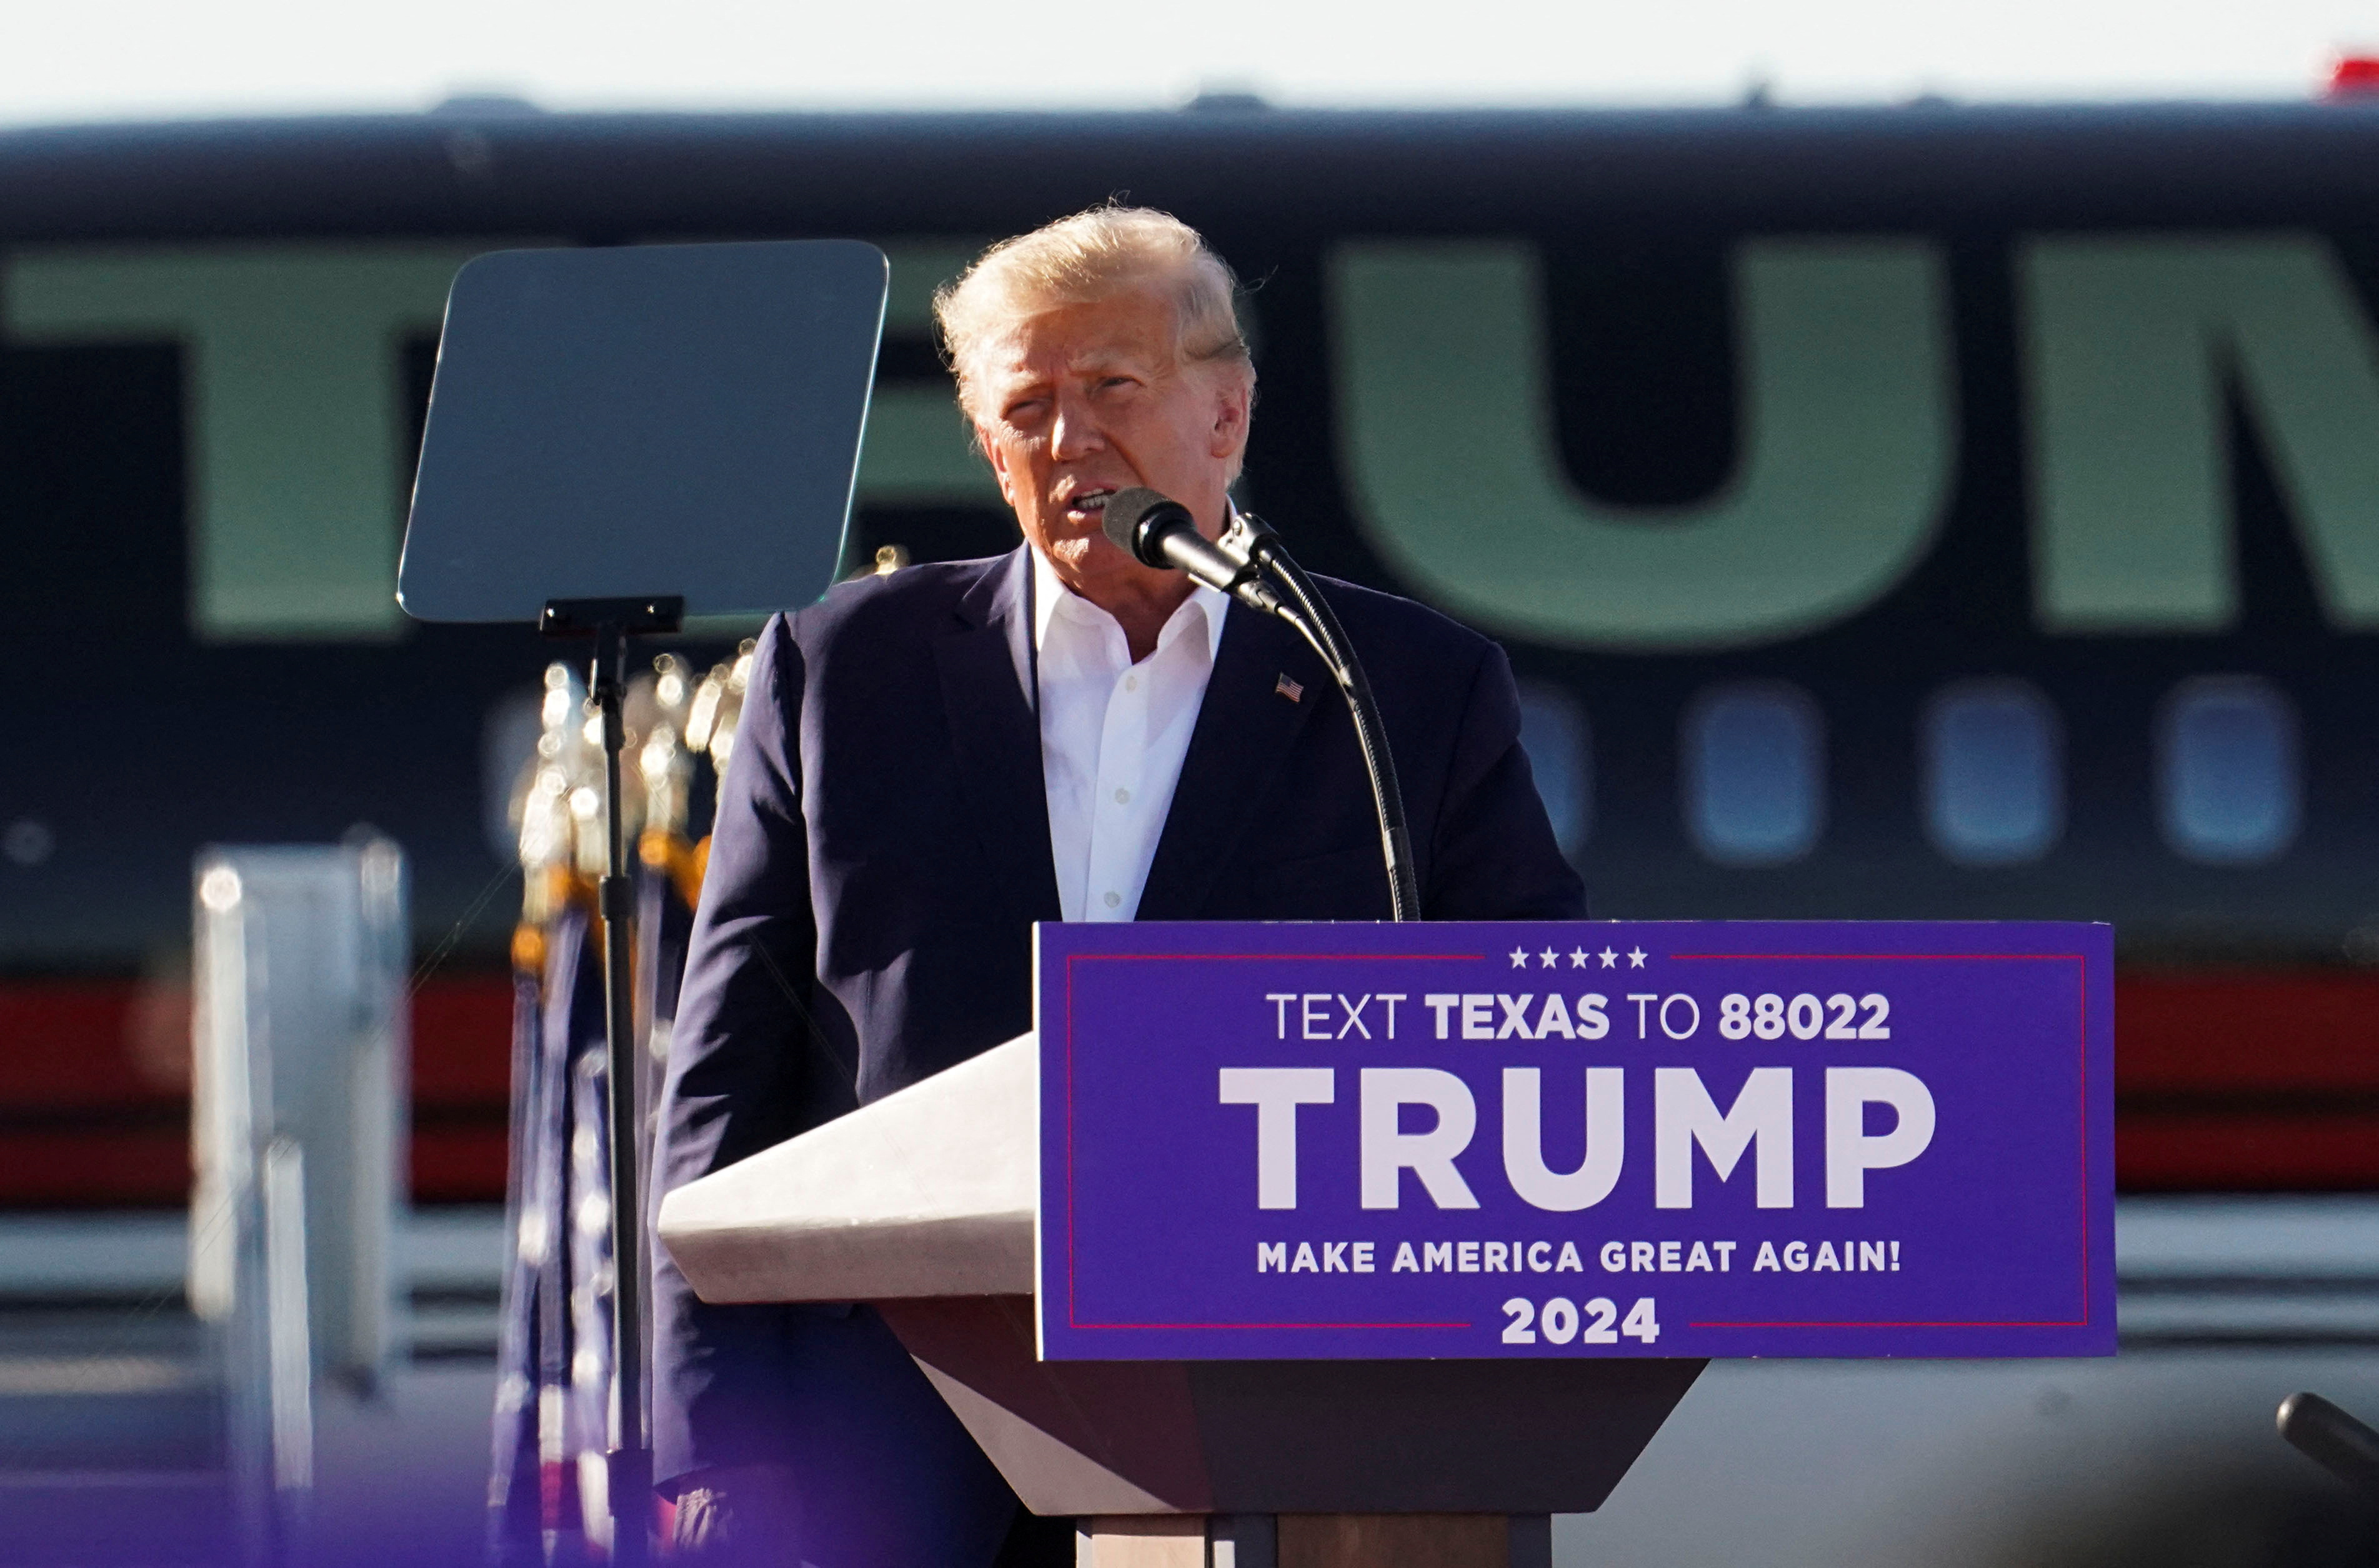 Former U.S. President Donald Trump holds a campaign rally in Waco, Texas